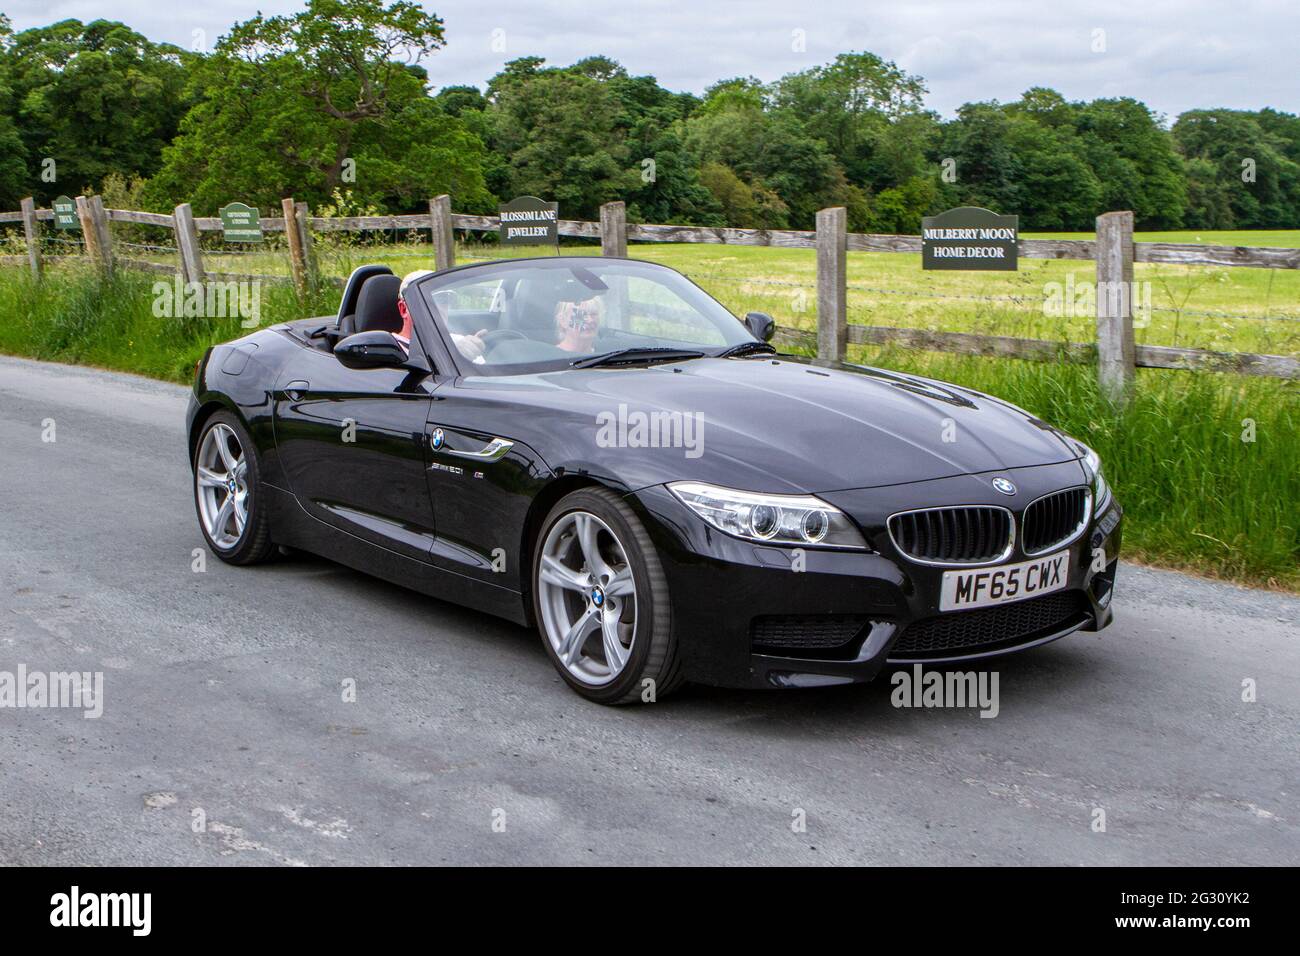 15 Black Bmw Z4 S Drive i M Sport 1997cc Petrol At The 58th Annual Manchester To Blackpool Vintage Classic Car Run Event A Touring Assembly Stock Photo Alamy